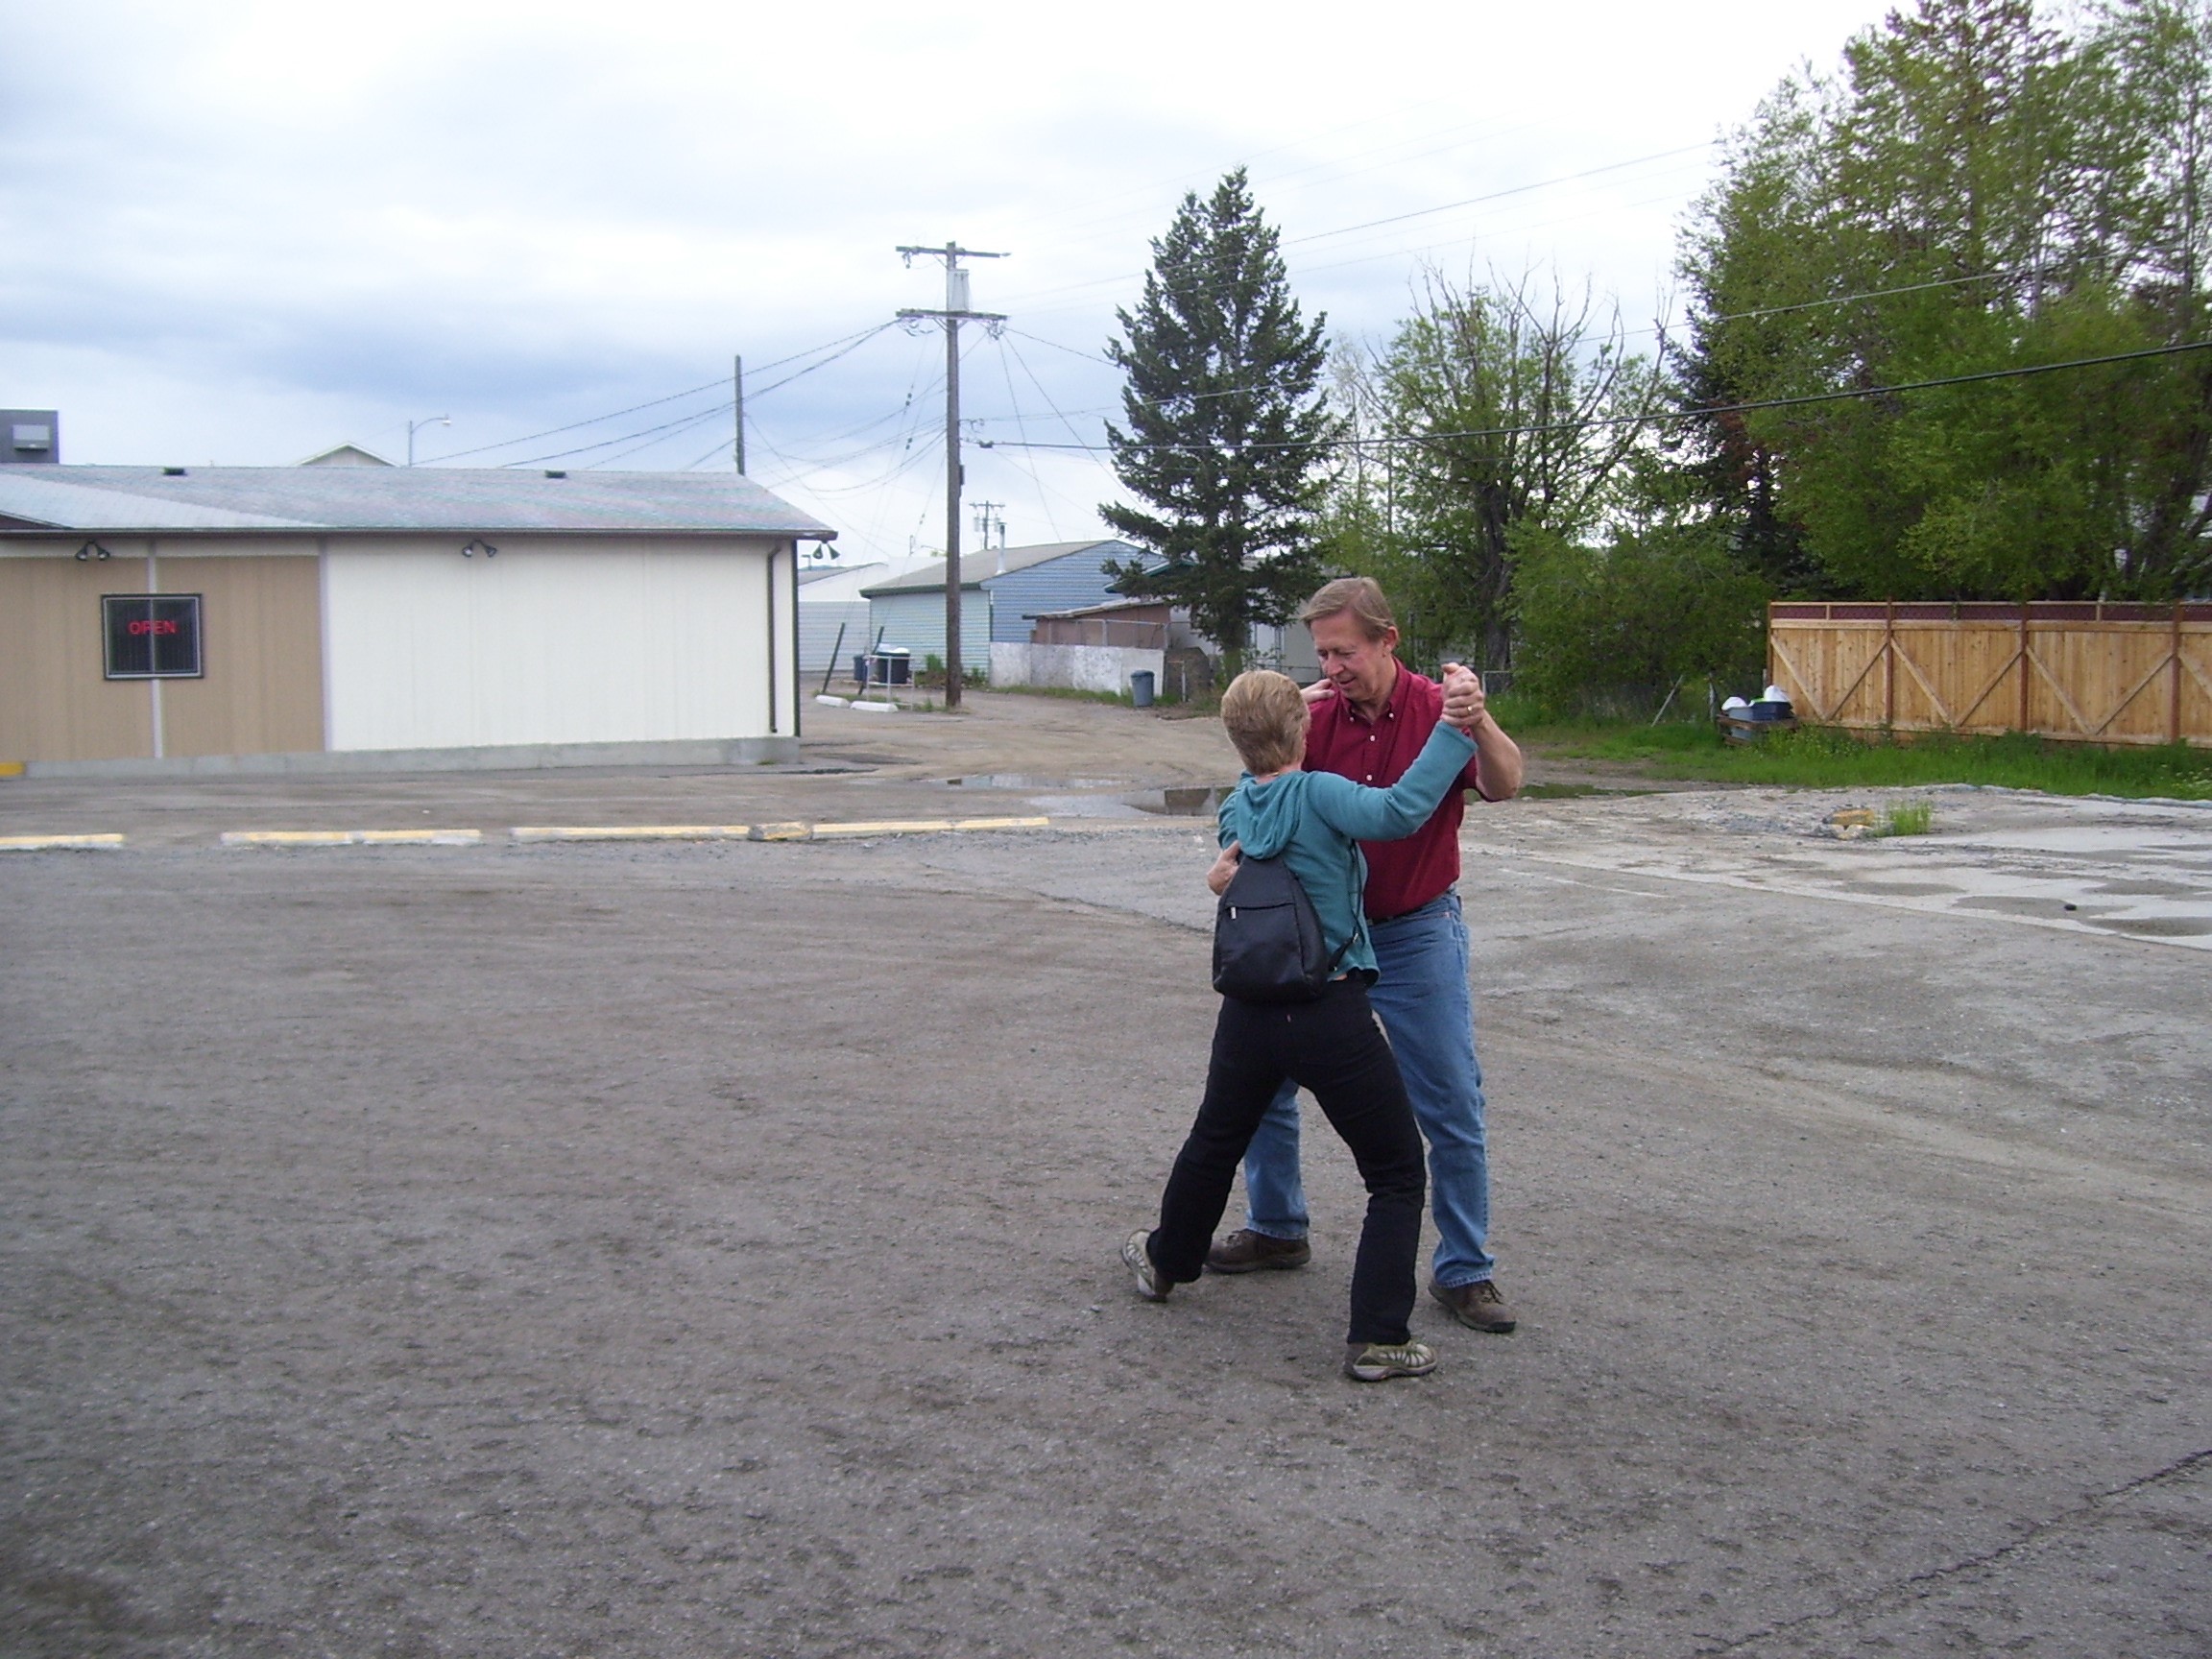 Alison and David Maslanka dancing outside in June 2008, somewhere in Wyoming